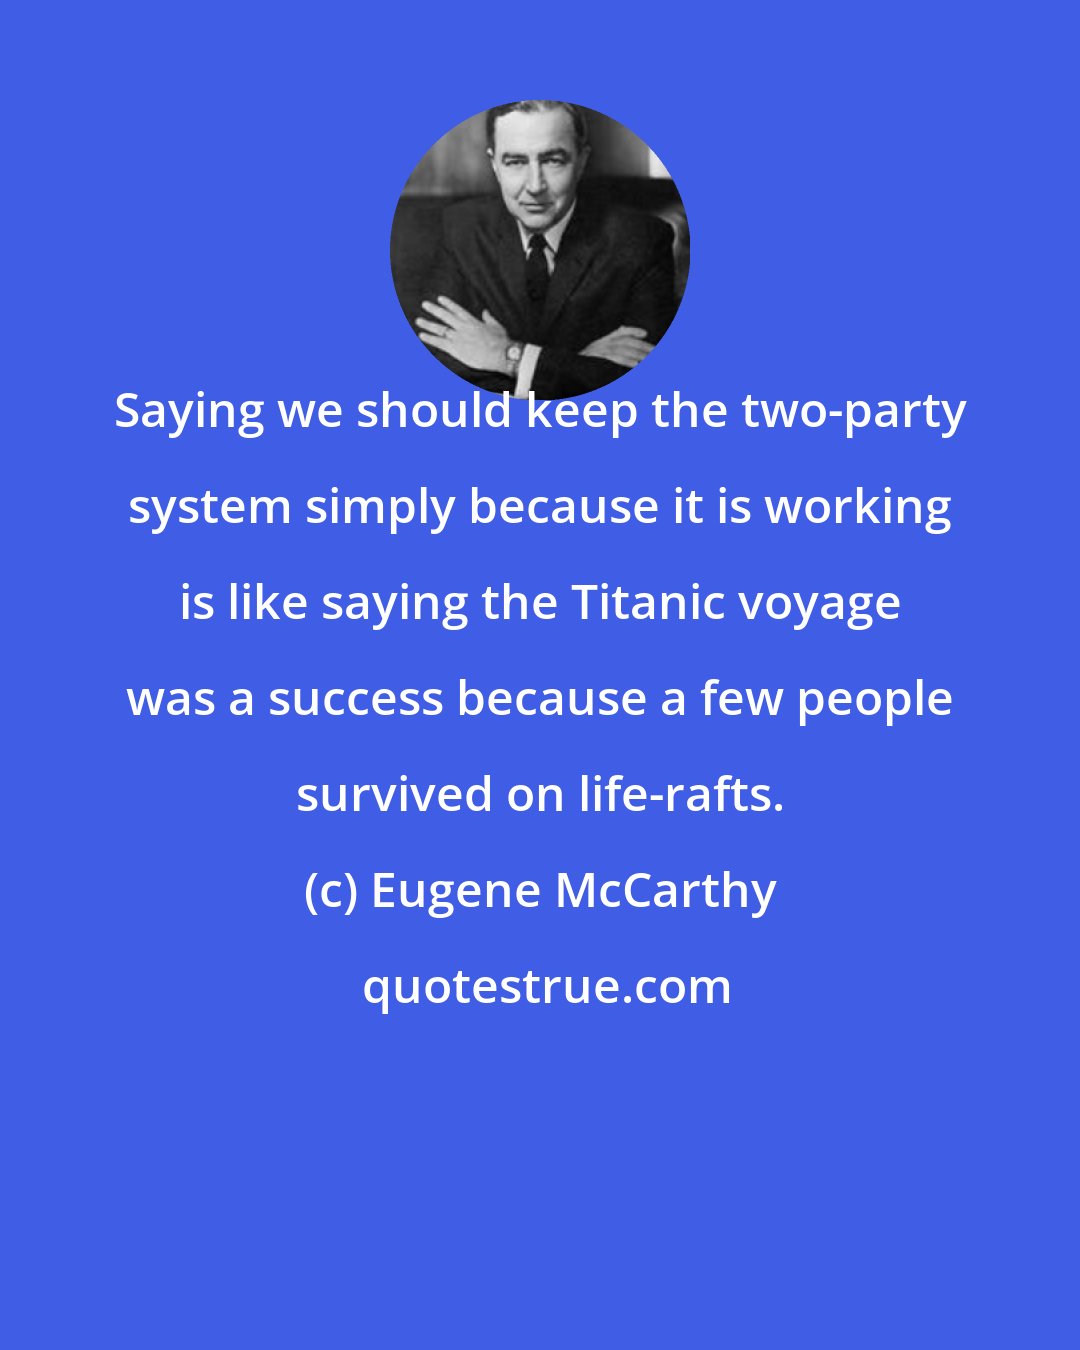 Eugene McCarthy: Saying we should keep the two-party system simply because it is working is like saying the Titanic voyage was a success because a few people survived on life-rafts.